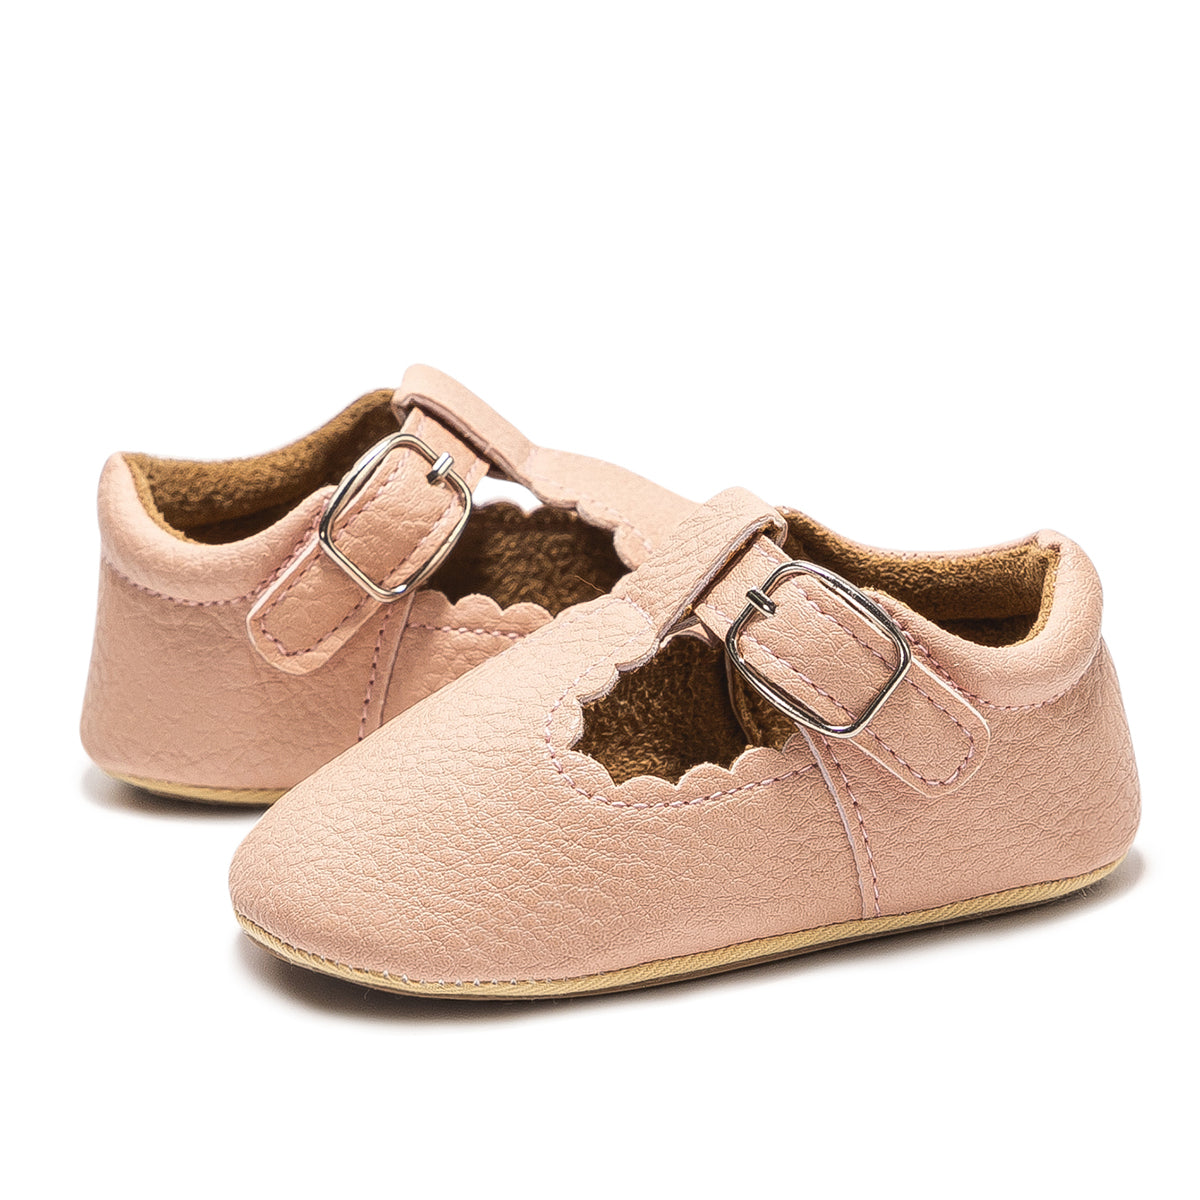 Baby Girl's Scalloped, T-strap All Occasion Shoes (Pink)